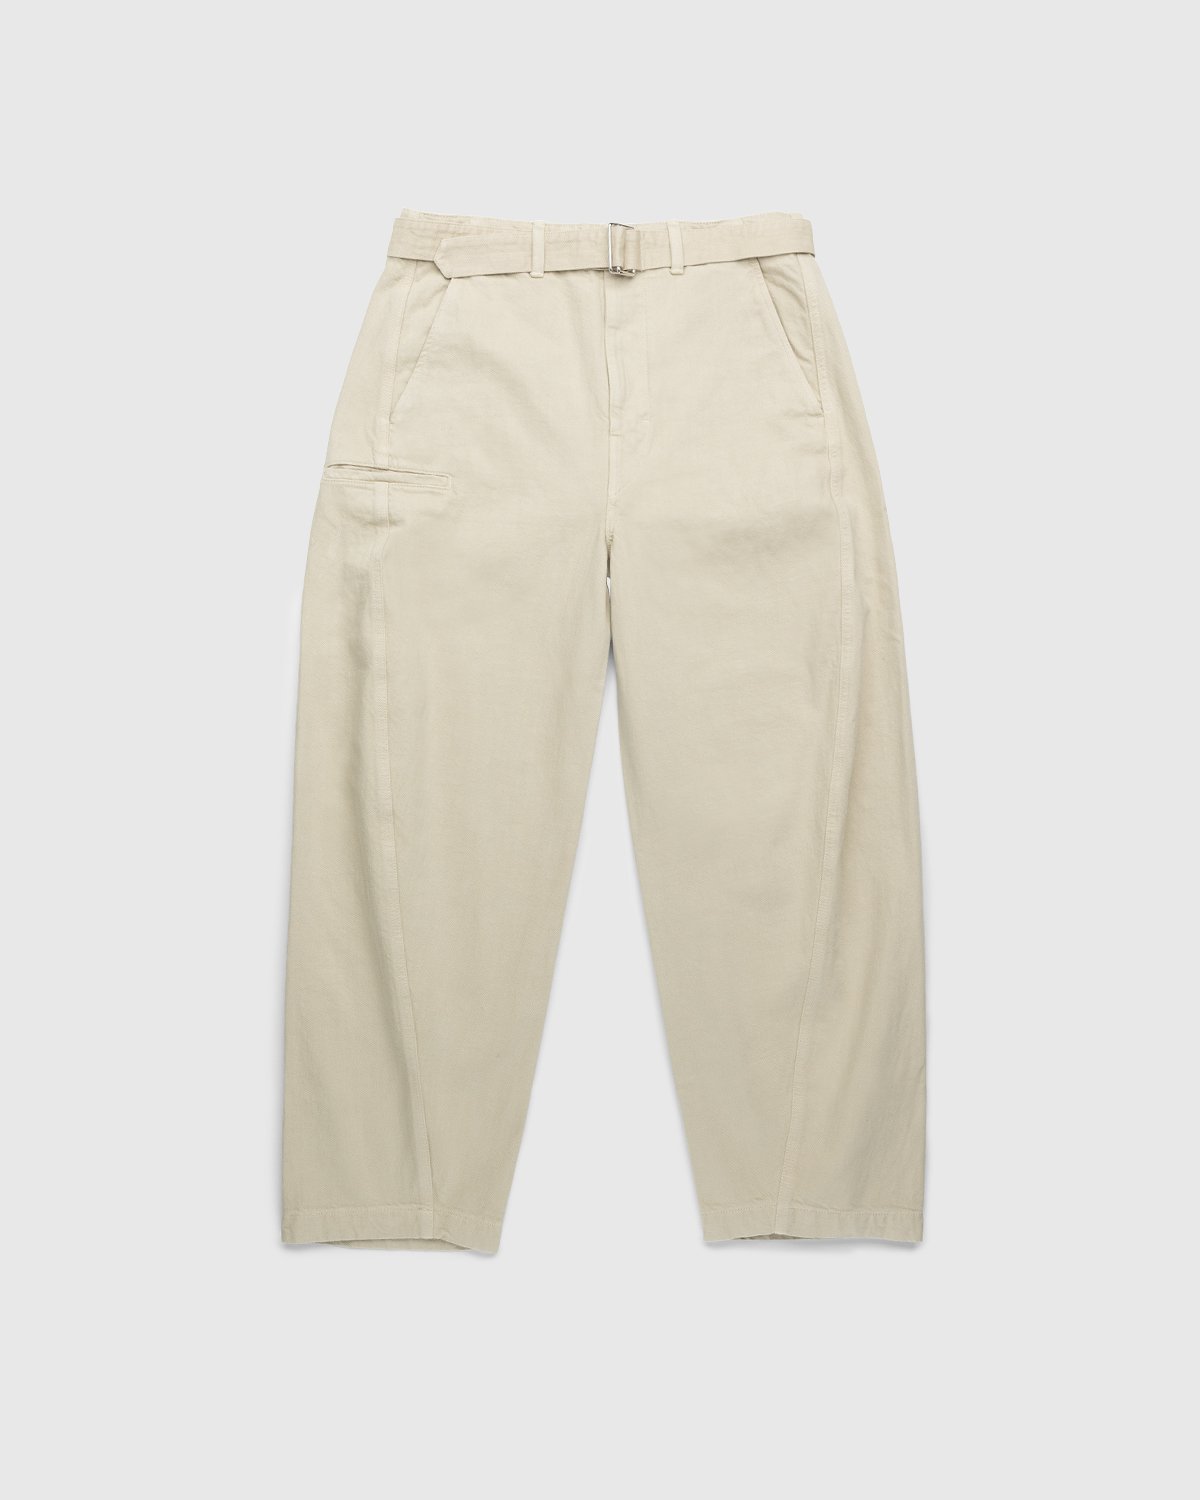 Lemaire - Rinsed Denim Twisted Pants Saltpeter - Clothing - Beige - Image 1